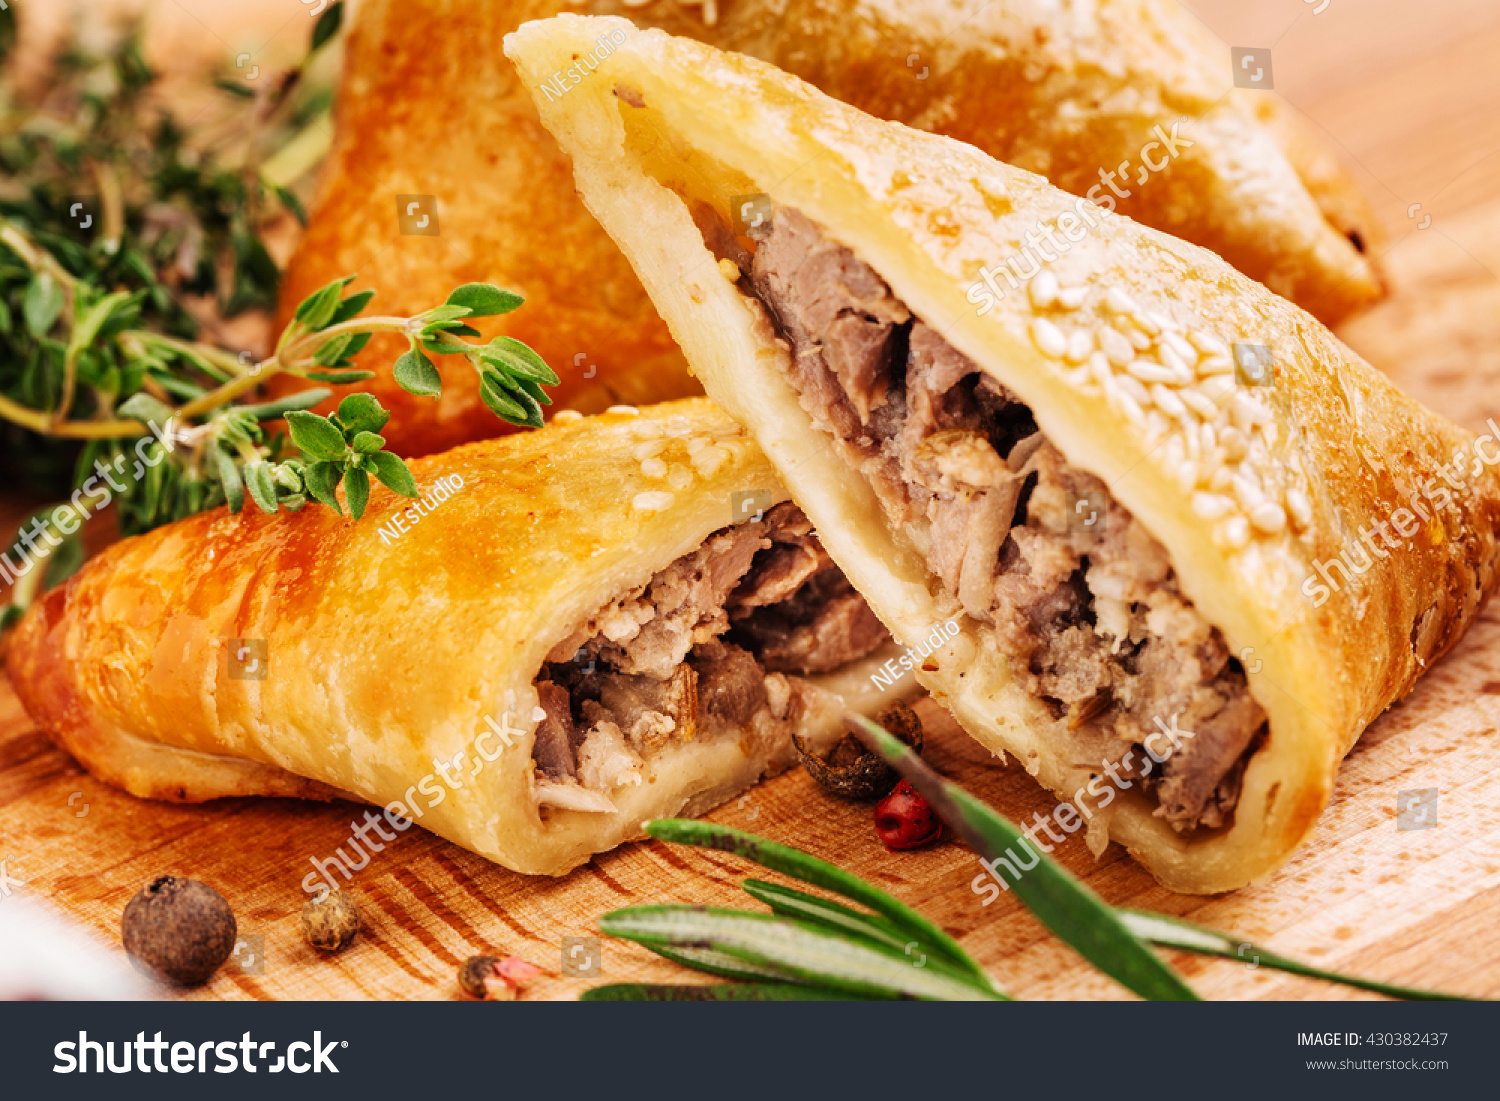 Delicious samosa pies with meat on plate. Menu, restaurant, recipe concept. Served in traditional oriental restaurant. Selected focus. #430382437